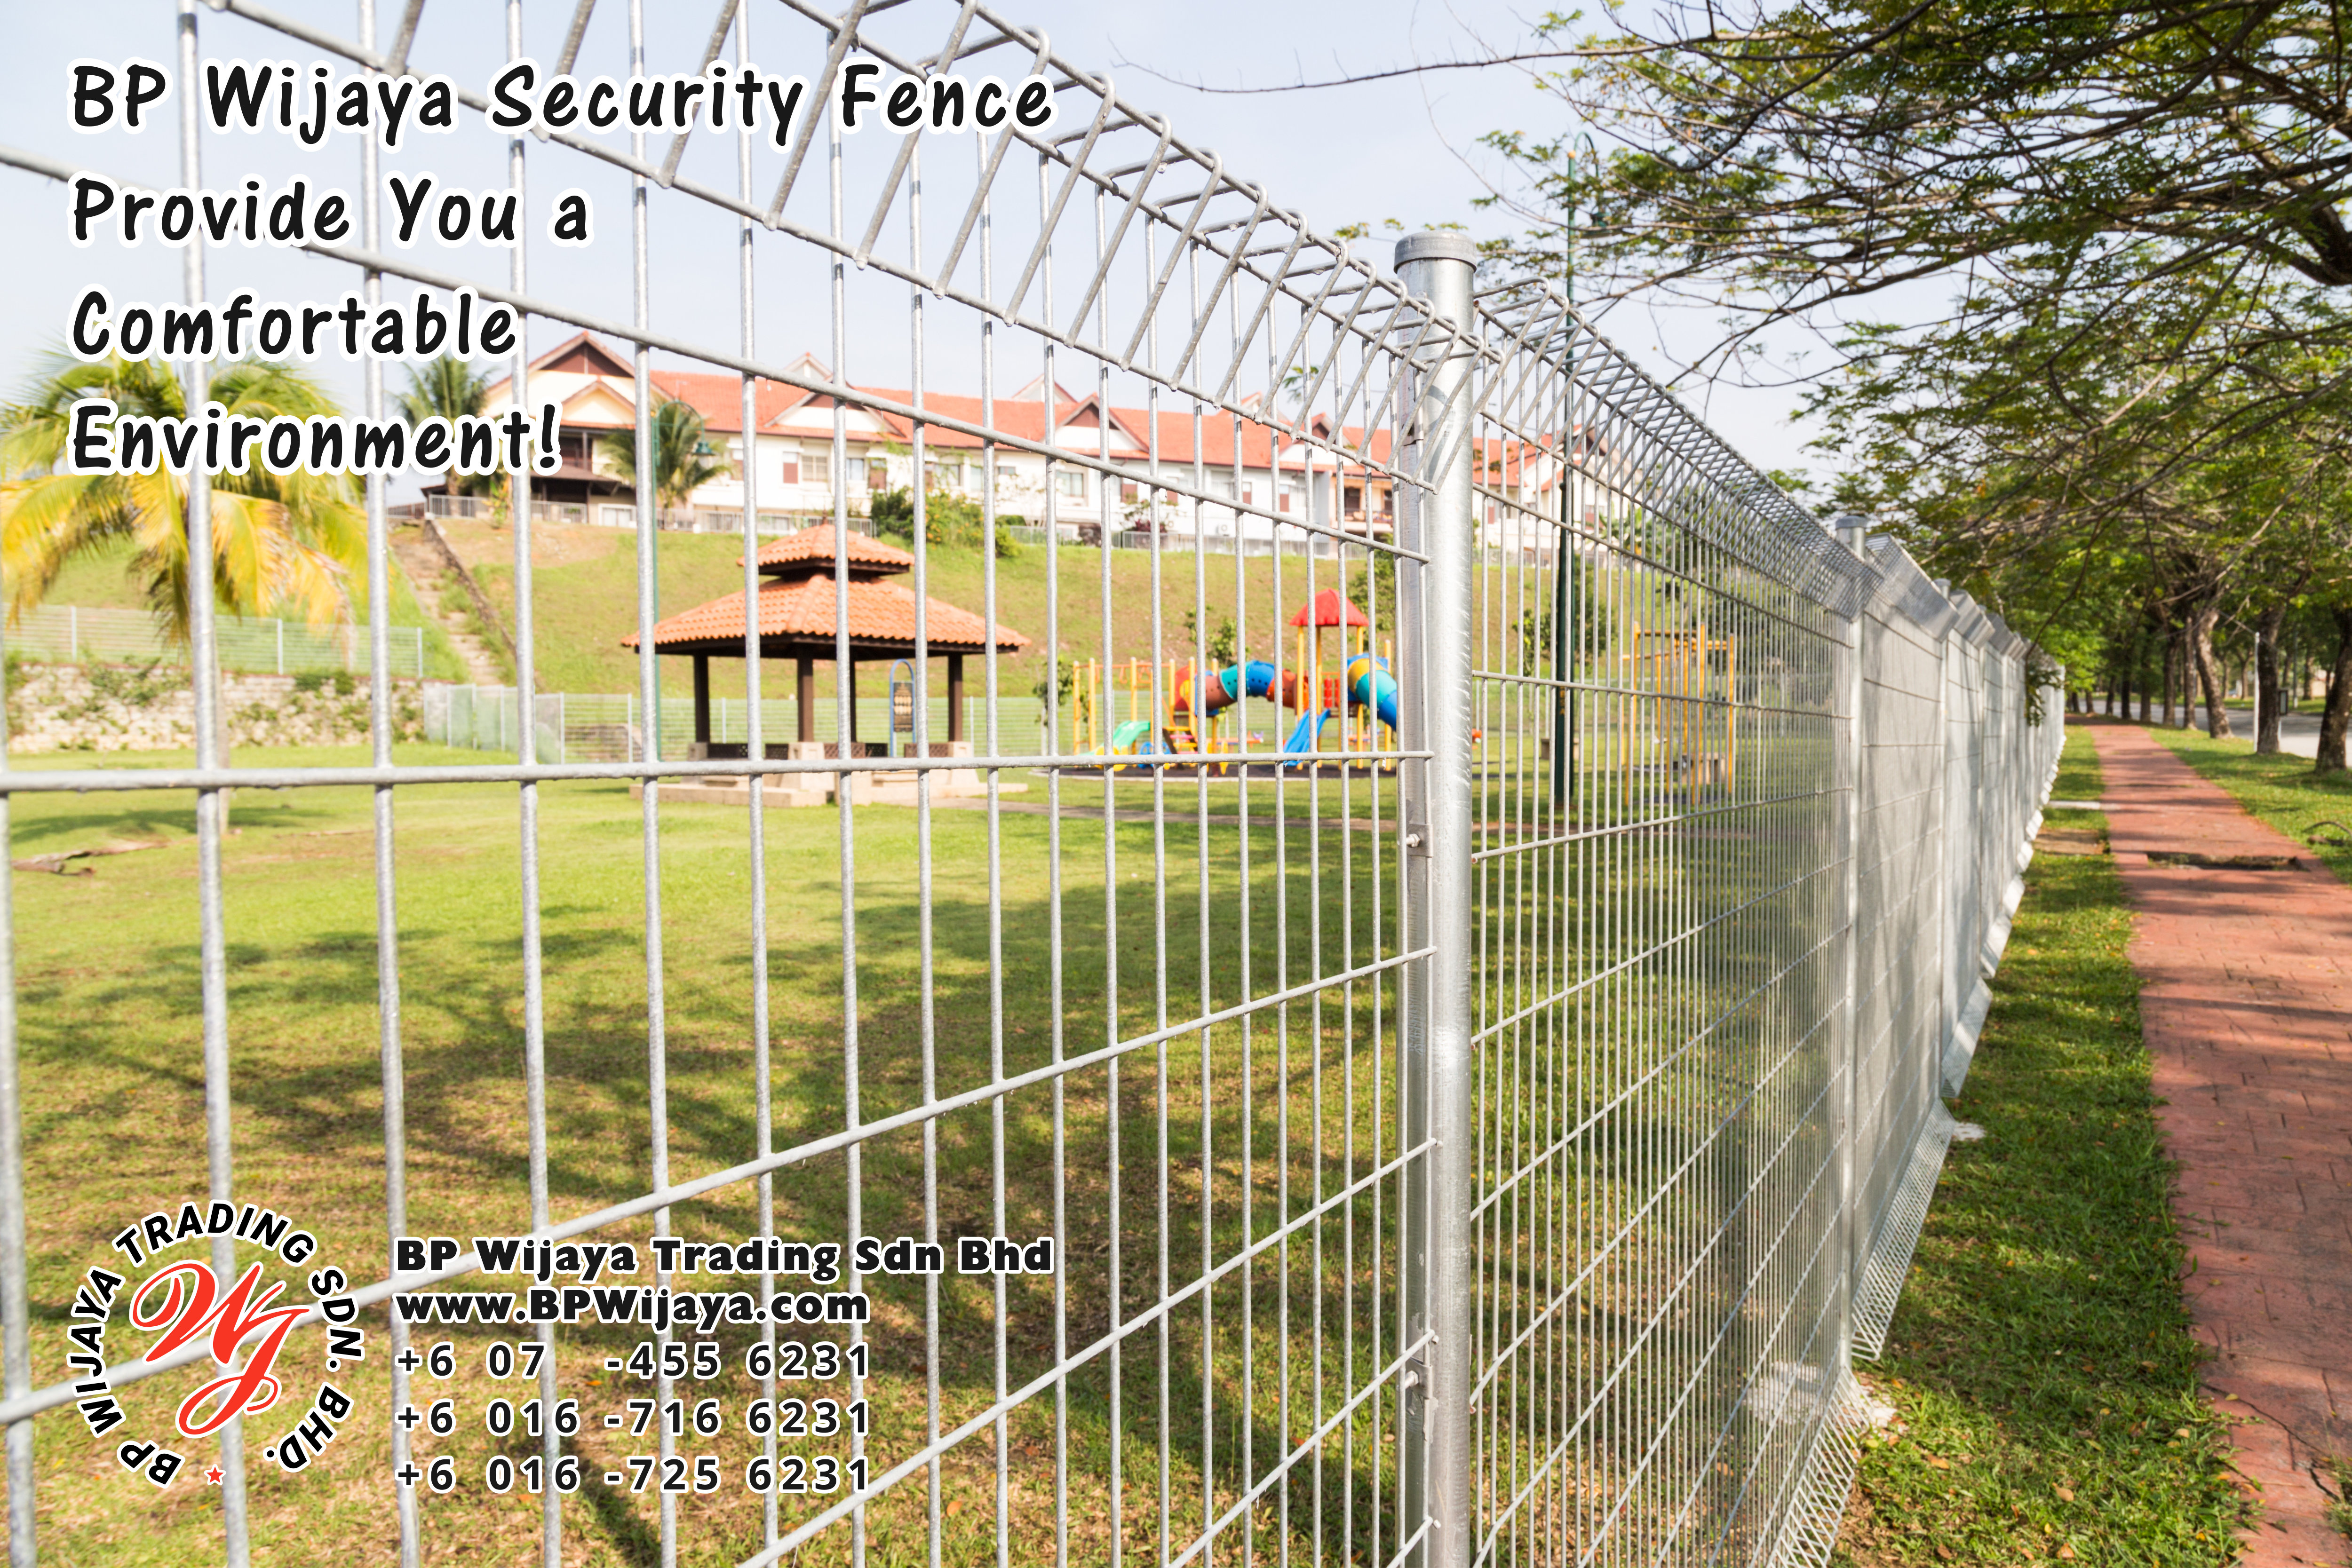 BP Wijaya Trading Sdn Bhd Malaysia Pahang Kuantan Temerloh Mentakab Manufacturer of Safety Fences Building Materials for Housing Construction Site Industial Security Fencing Factory A01-24